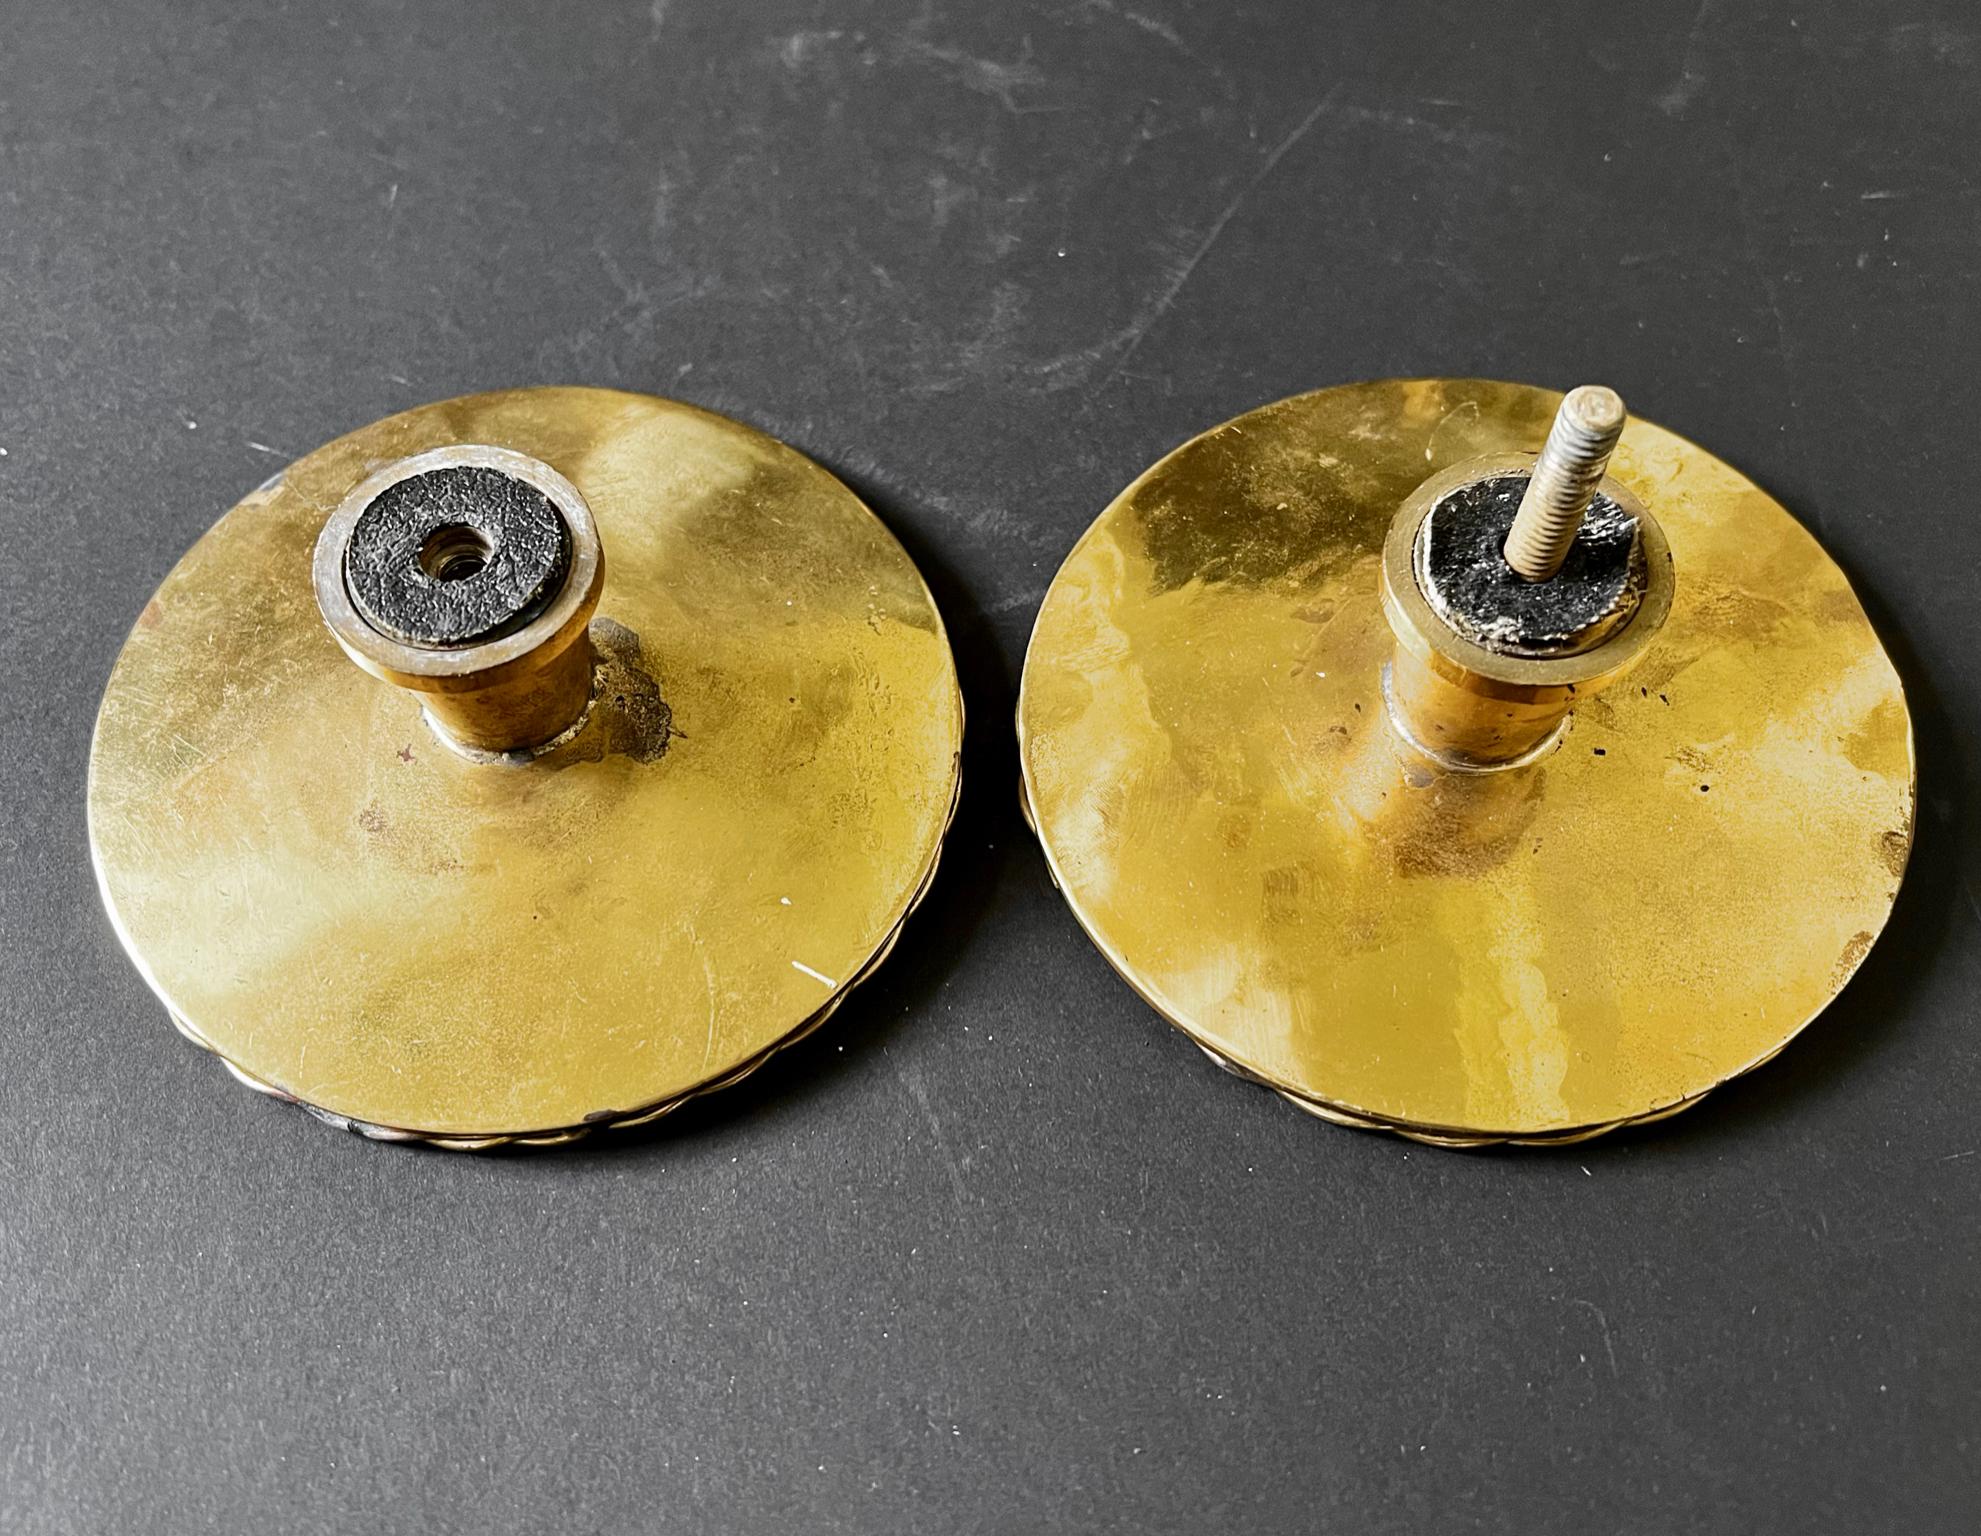 Metal Set of Two Circular Push-Pull Door Handles in Brass, Mid-20th Century, France For Sale